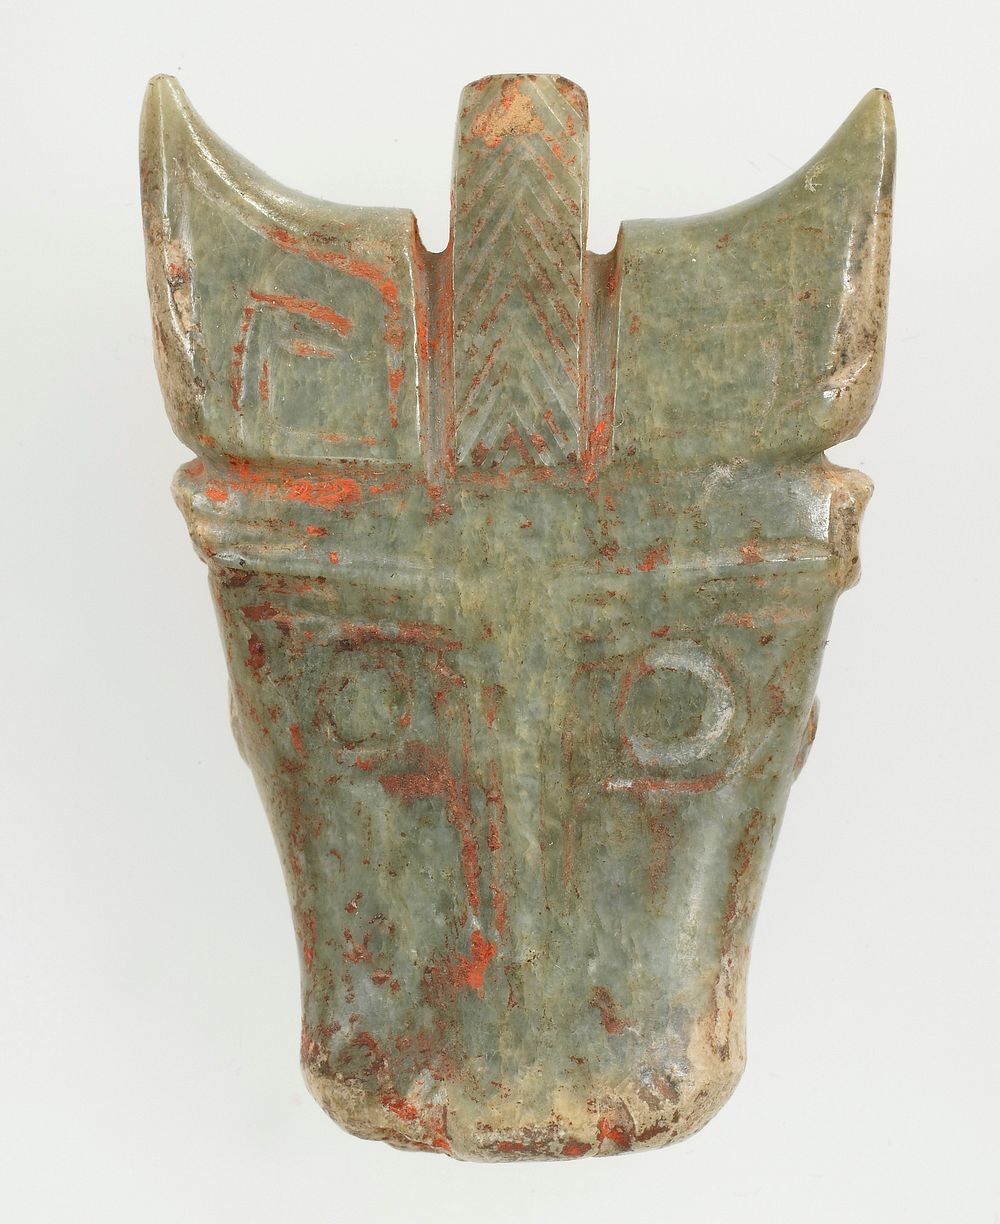 Mask of animal with horns can be identified as bull; simple incision to indicate the detail of the animal on the front only.…